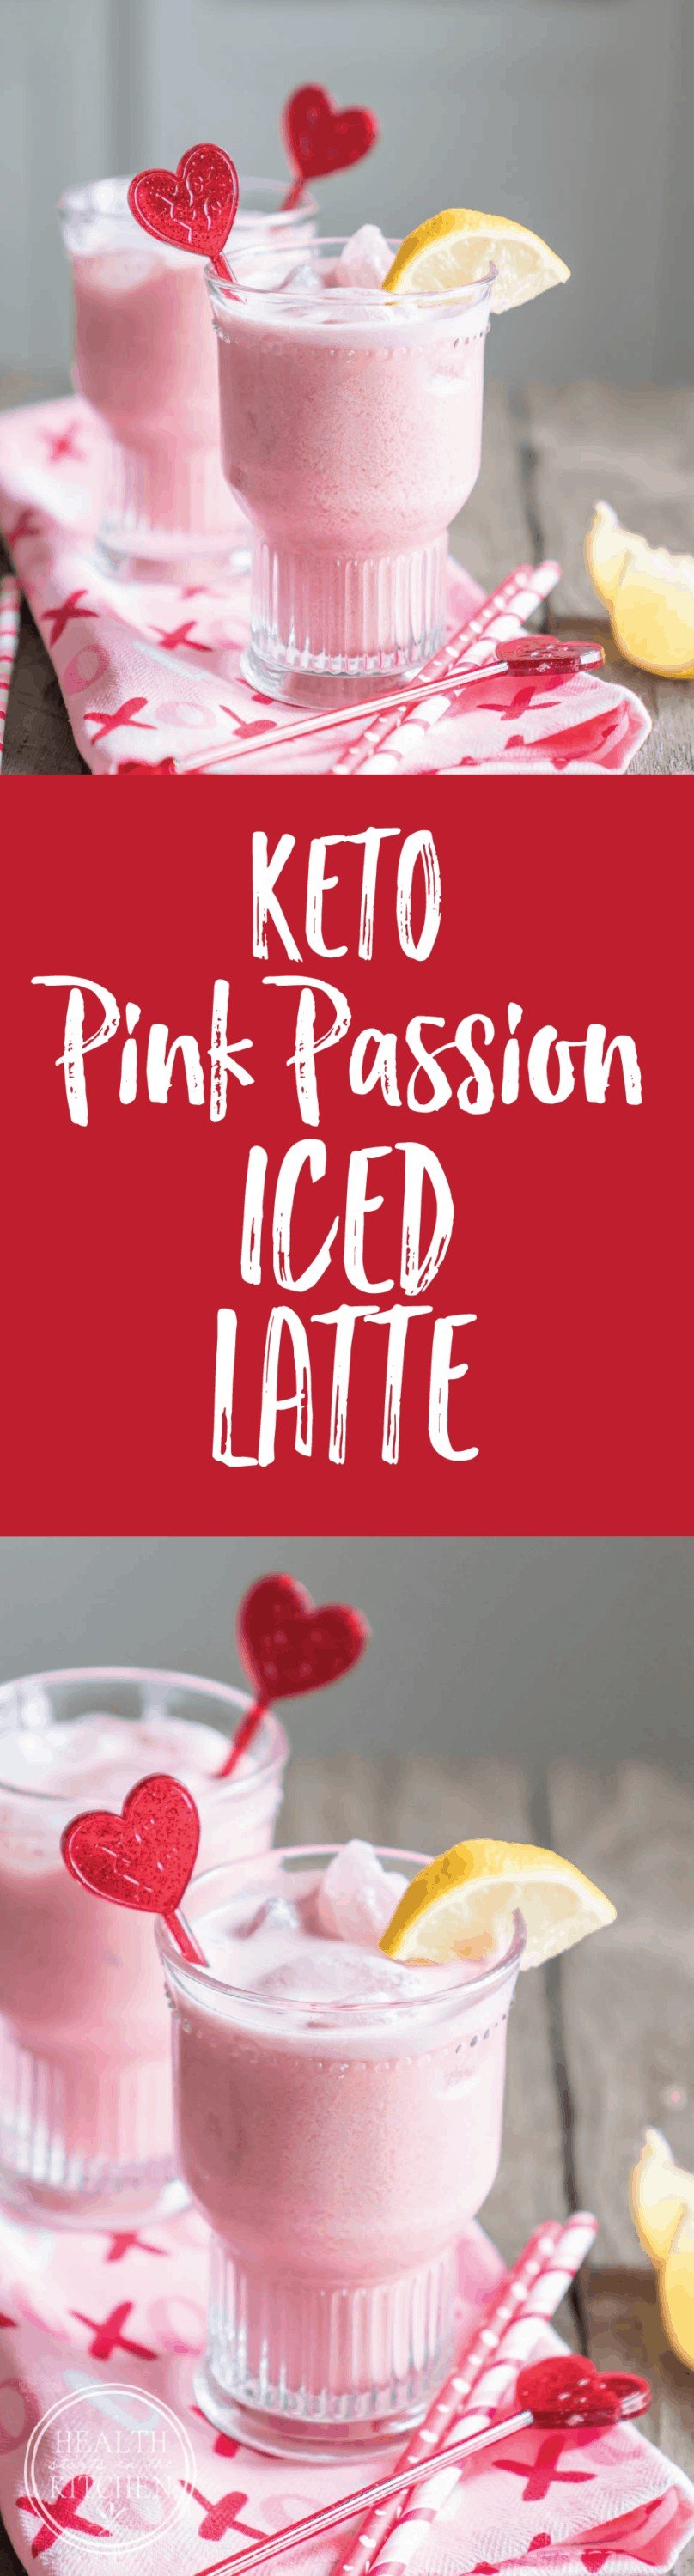 Keto Pink Passion Hibiscus Iced Latte - Healthier than Starbucks with NO GMOs and Low in Carbs, Keto Friendly